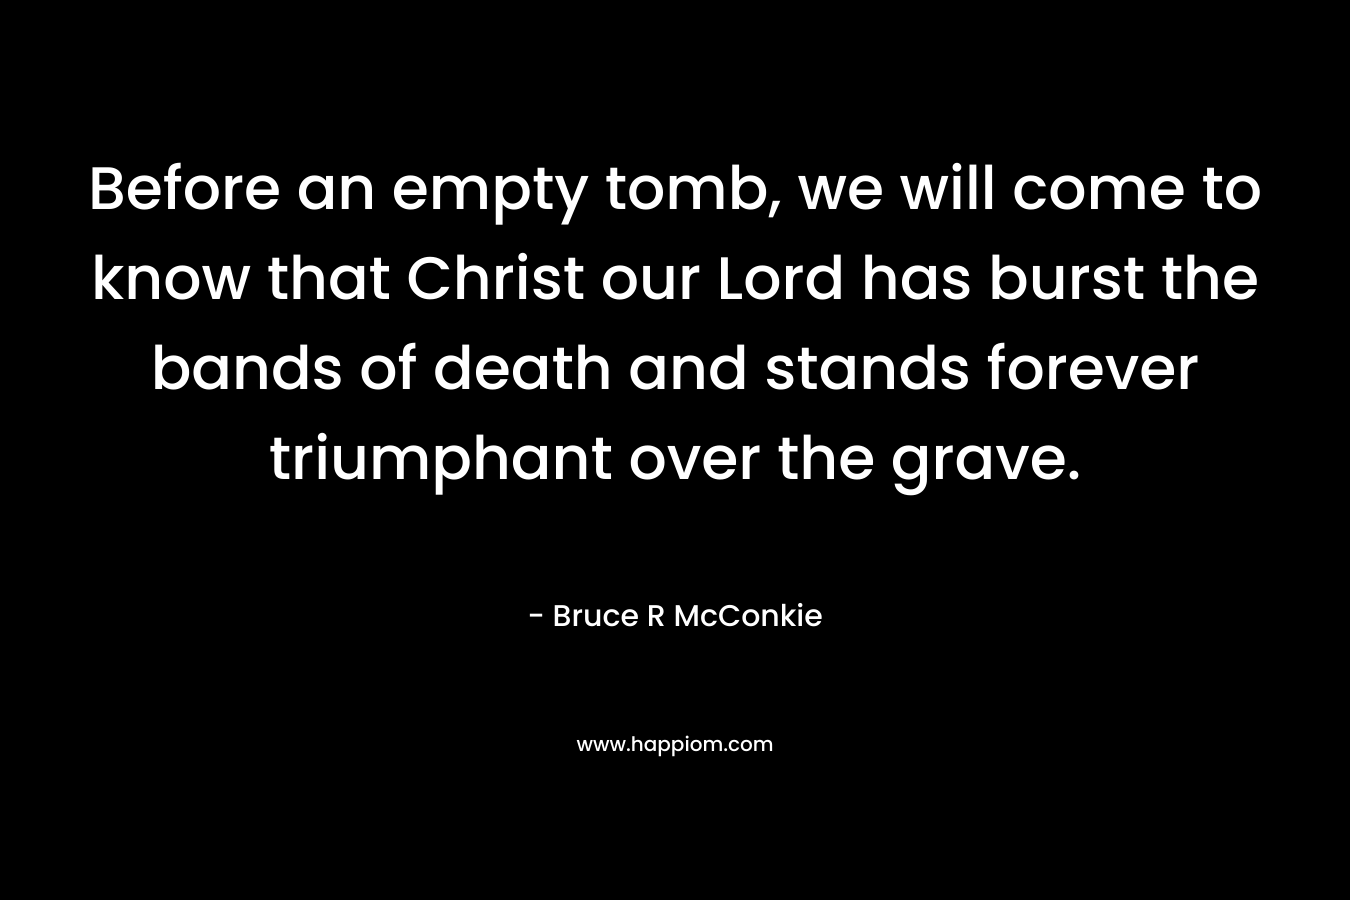 Before an empty tomb, we will come to know that Christ our Lord has burst the bands of death and stands forever triumphant over the grave.